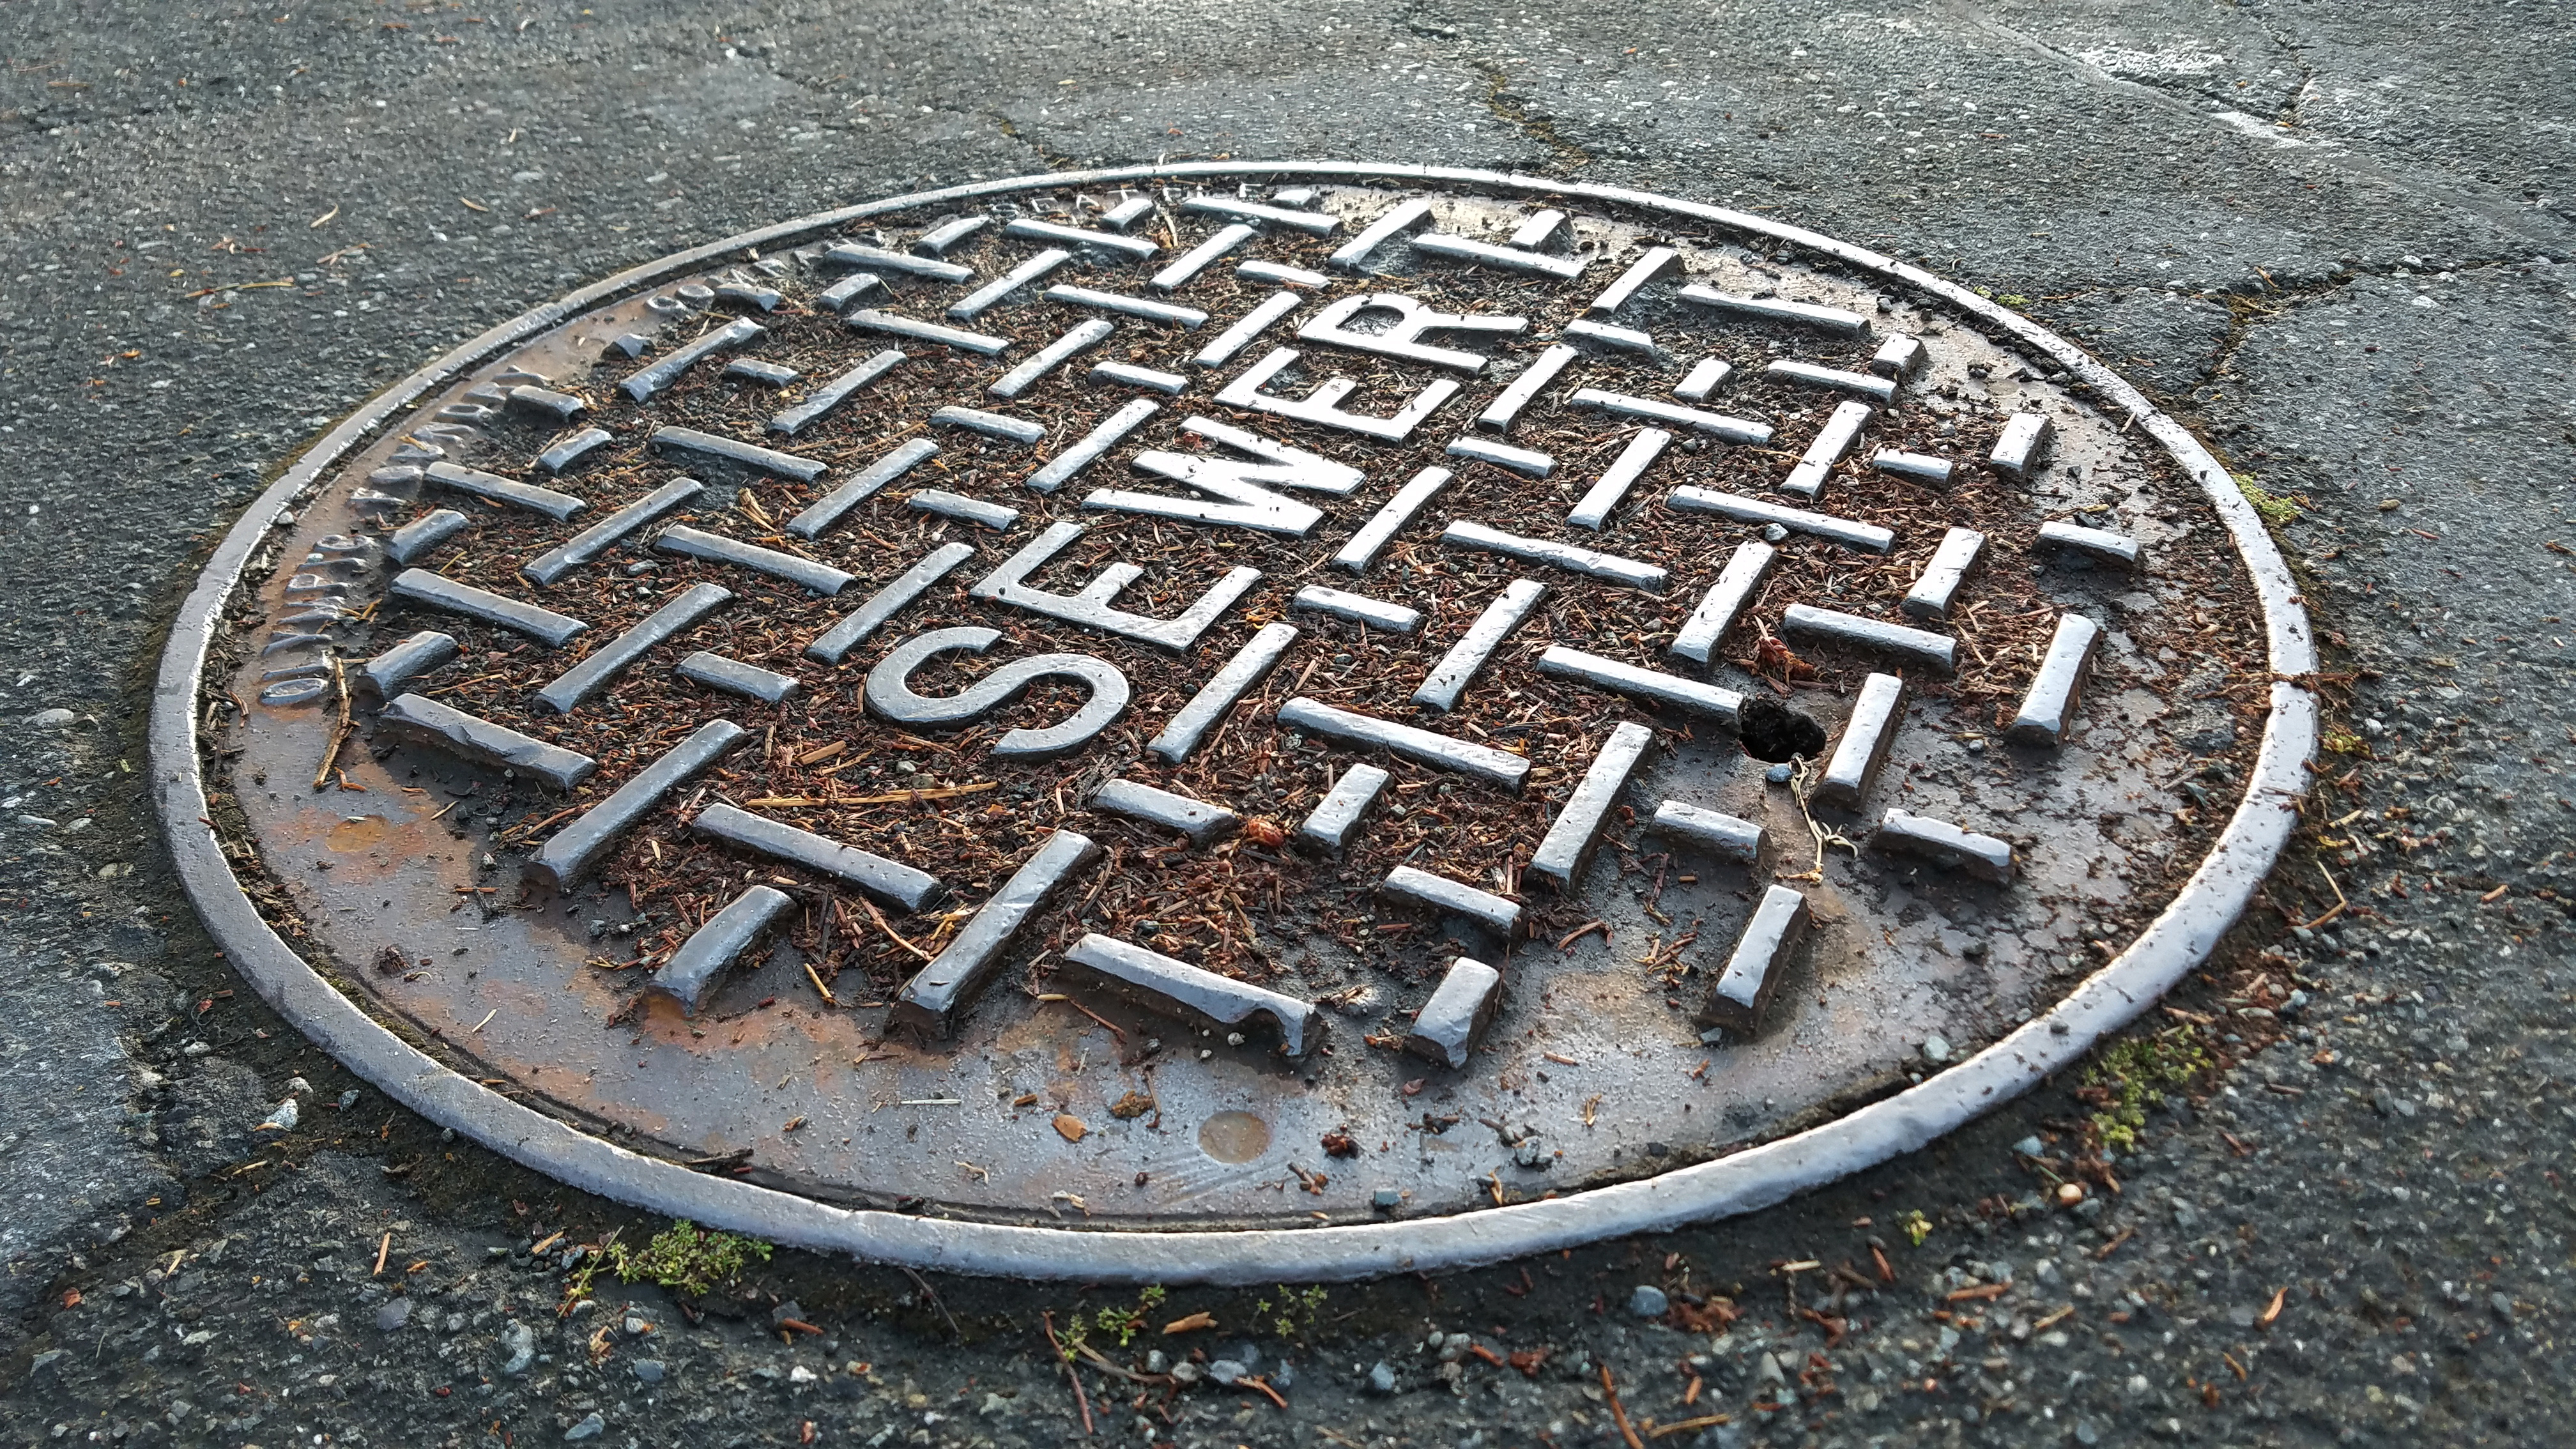 Manhole cover sewer